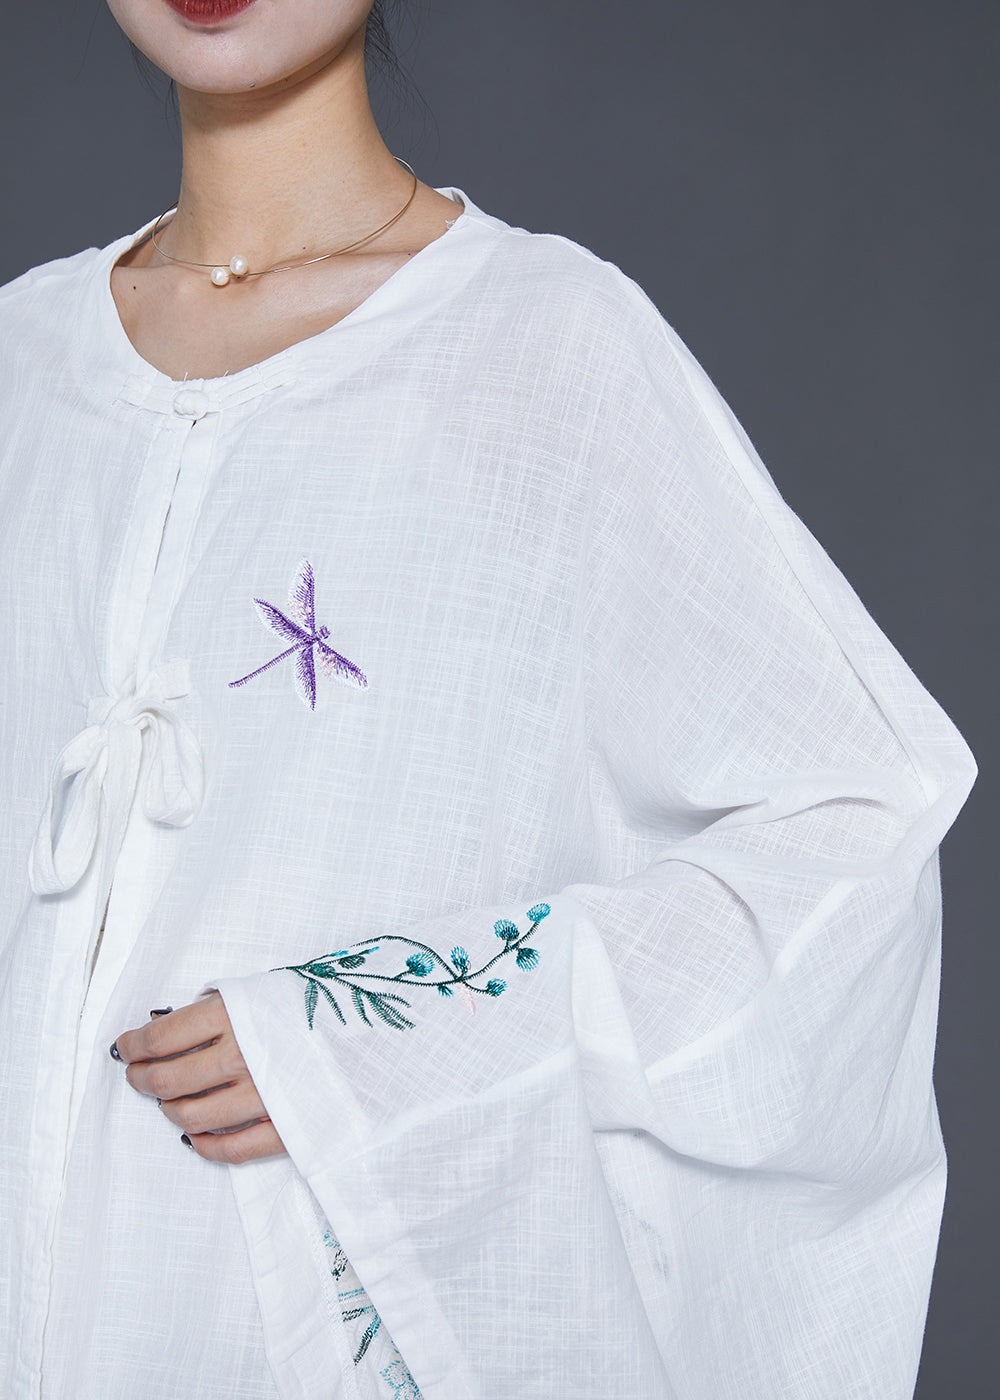 DIY White Embroideried Oversized Linen Dress Fall